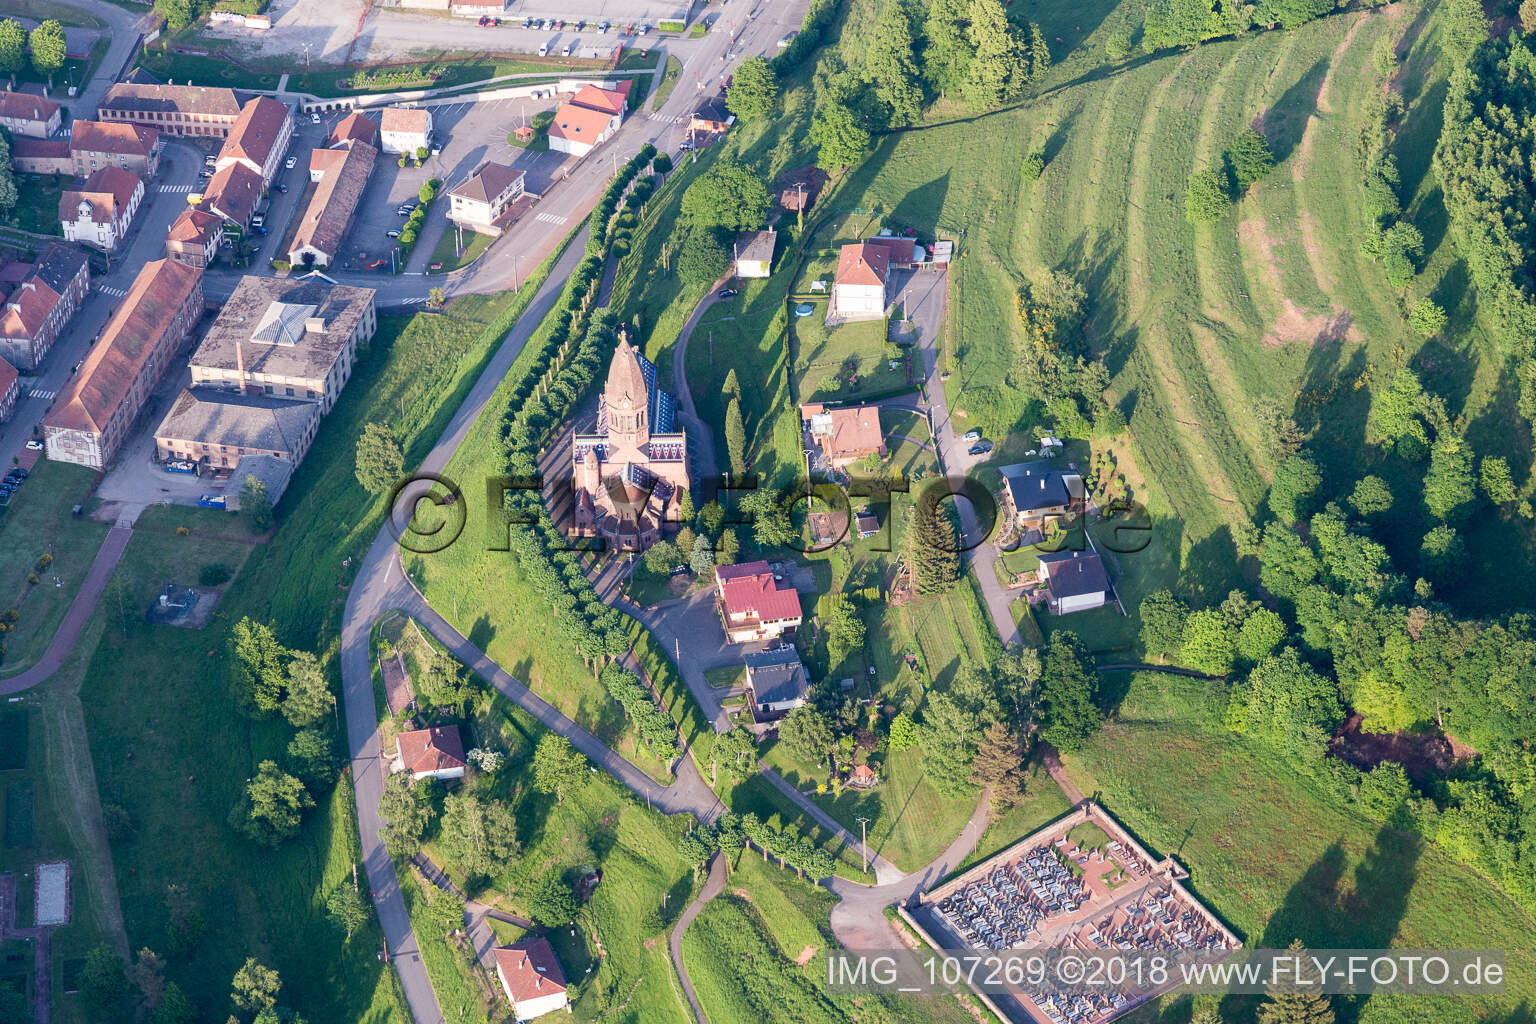 Aerial photograpy of Église Saint-Louis de Saint-Louis-lès-Bitche (Lorraine) in Saint-Louis-lès-Bitche in the state Moselle, France